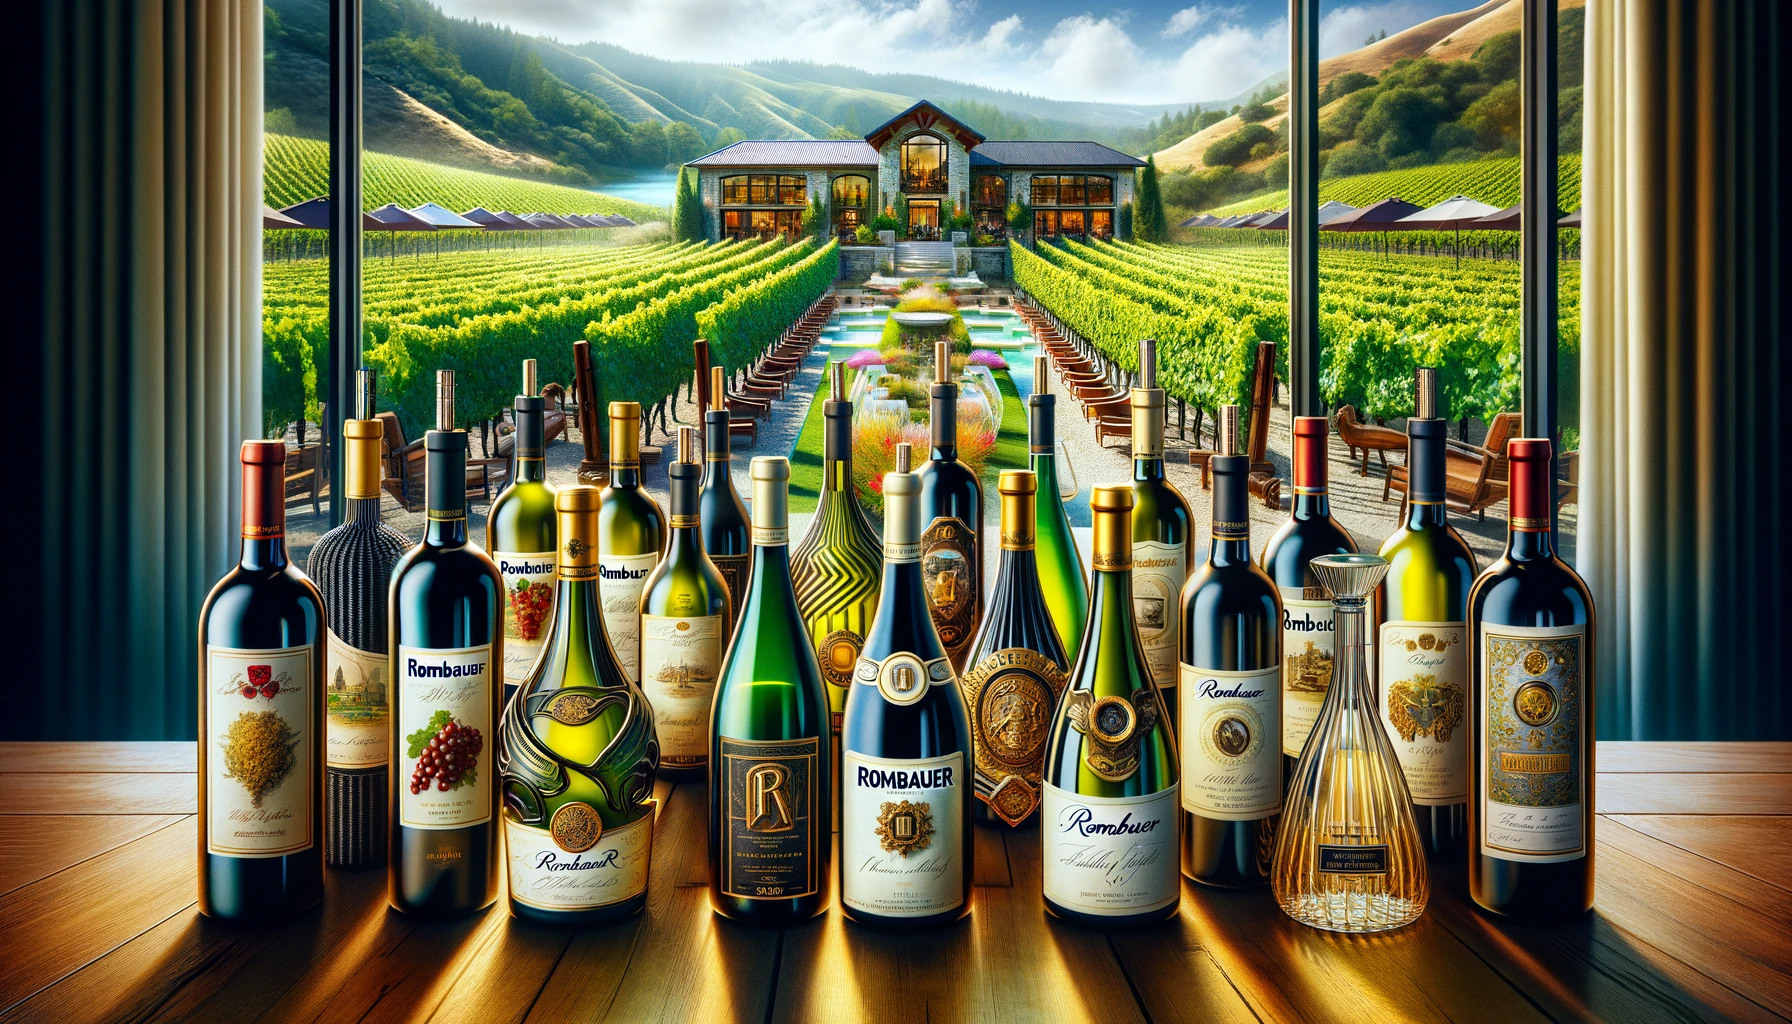 An-elegant-display-of-various-Rombauer-wine-bottles-each-unique-in-design-arranged-against-a-picturesque-backdrop-of-the-vineyard-and-tasting-room